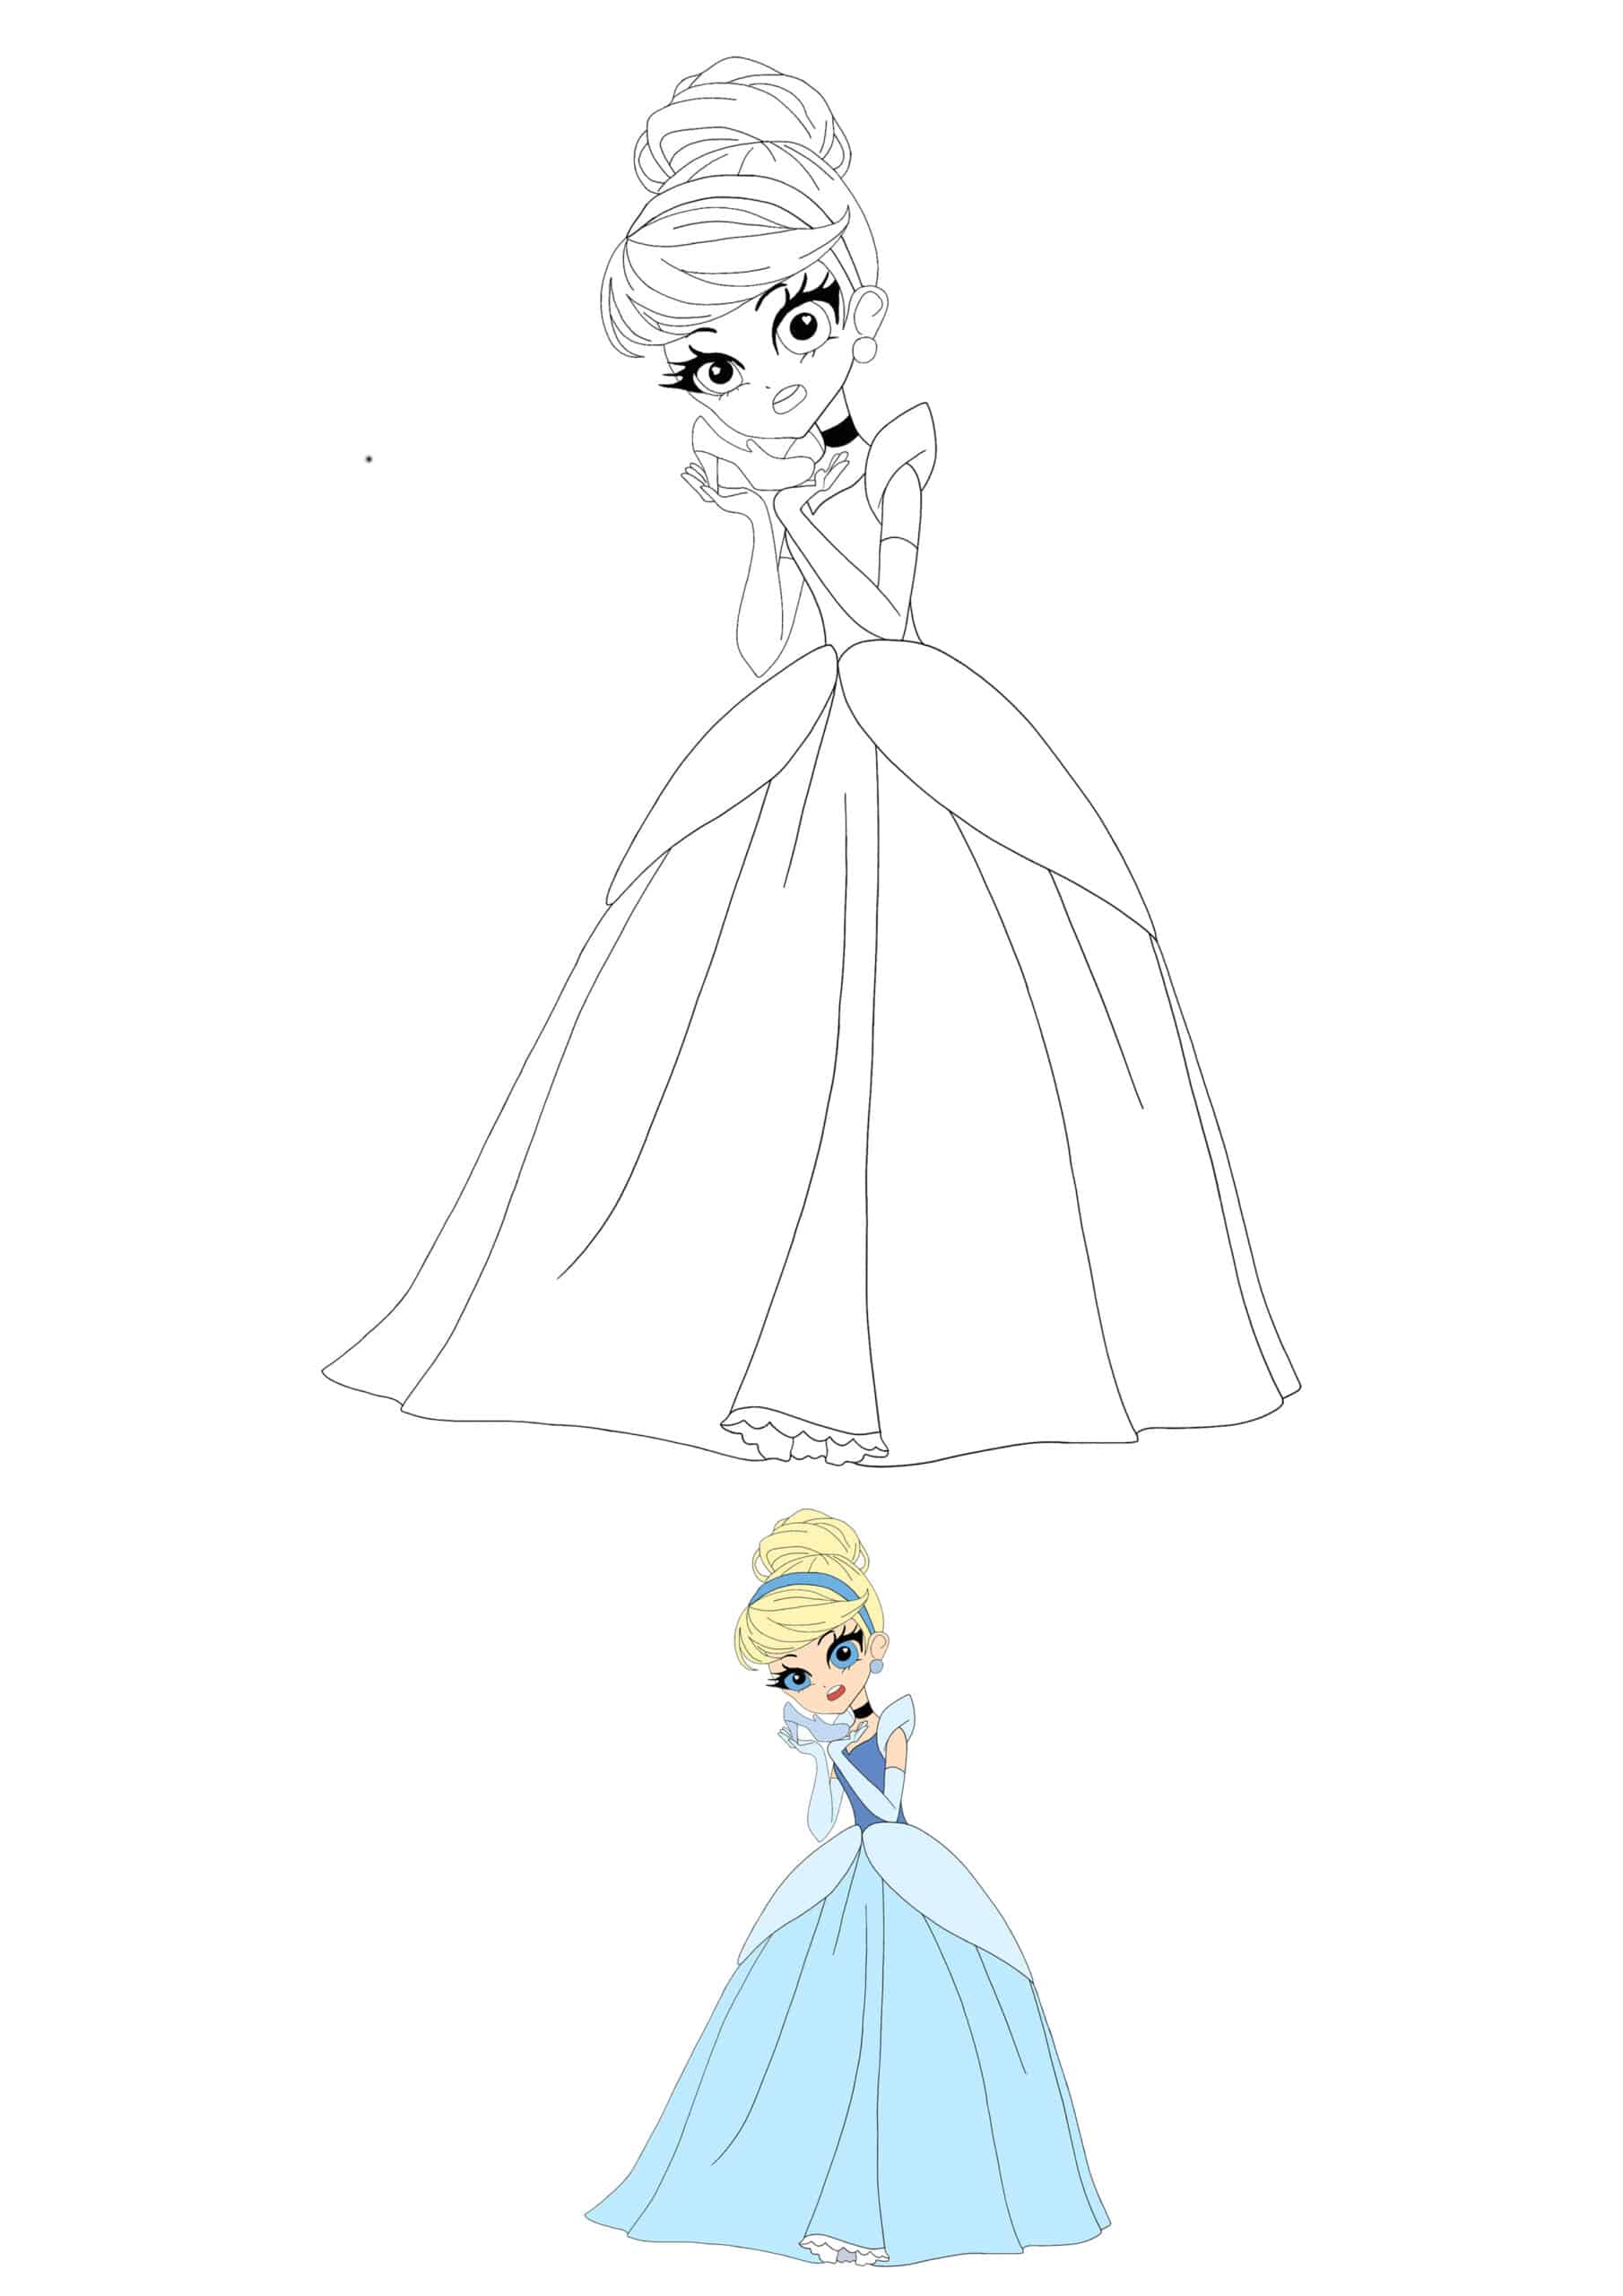 880  Coloring Pages Princess Cinderella  Latest Free